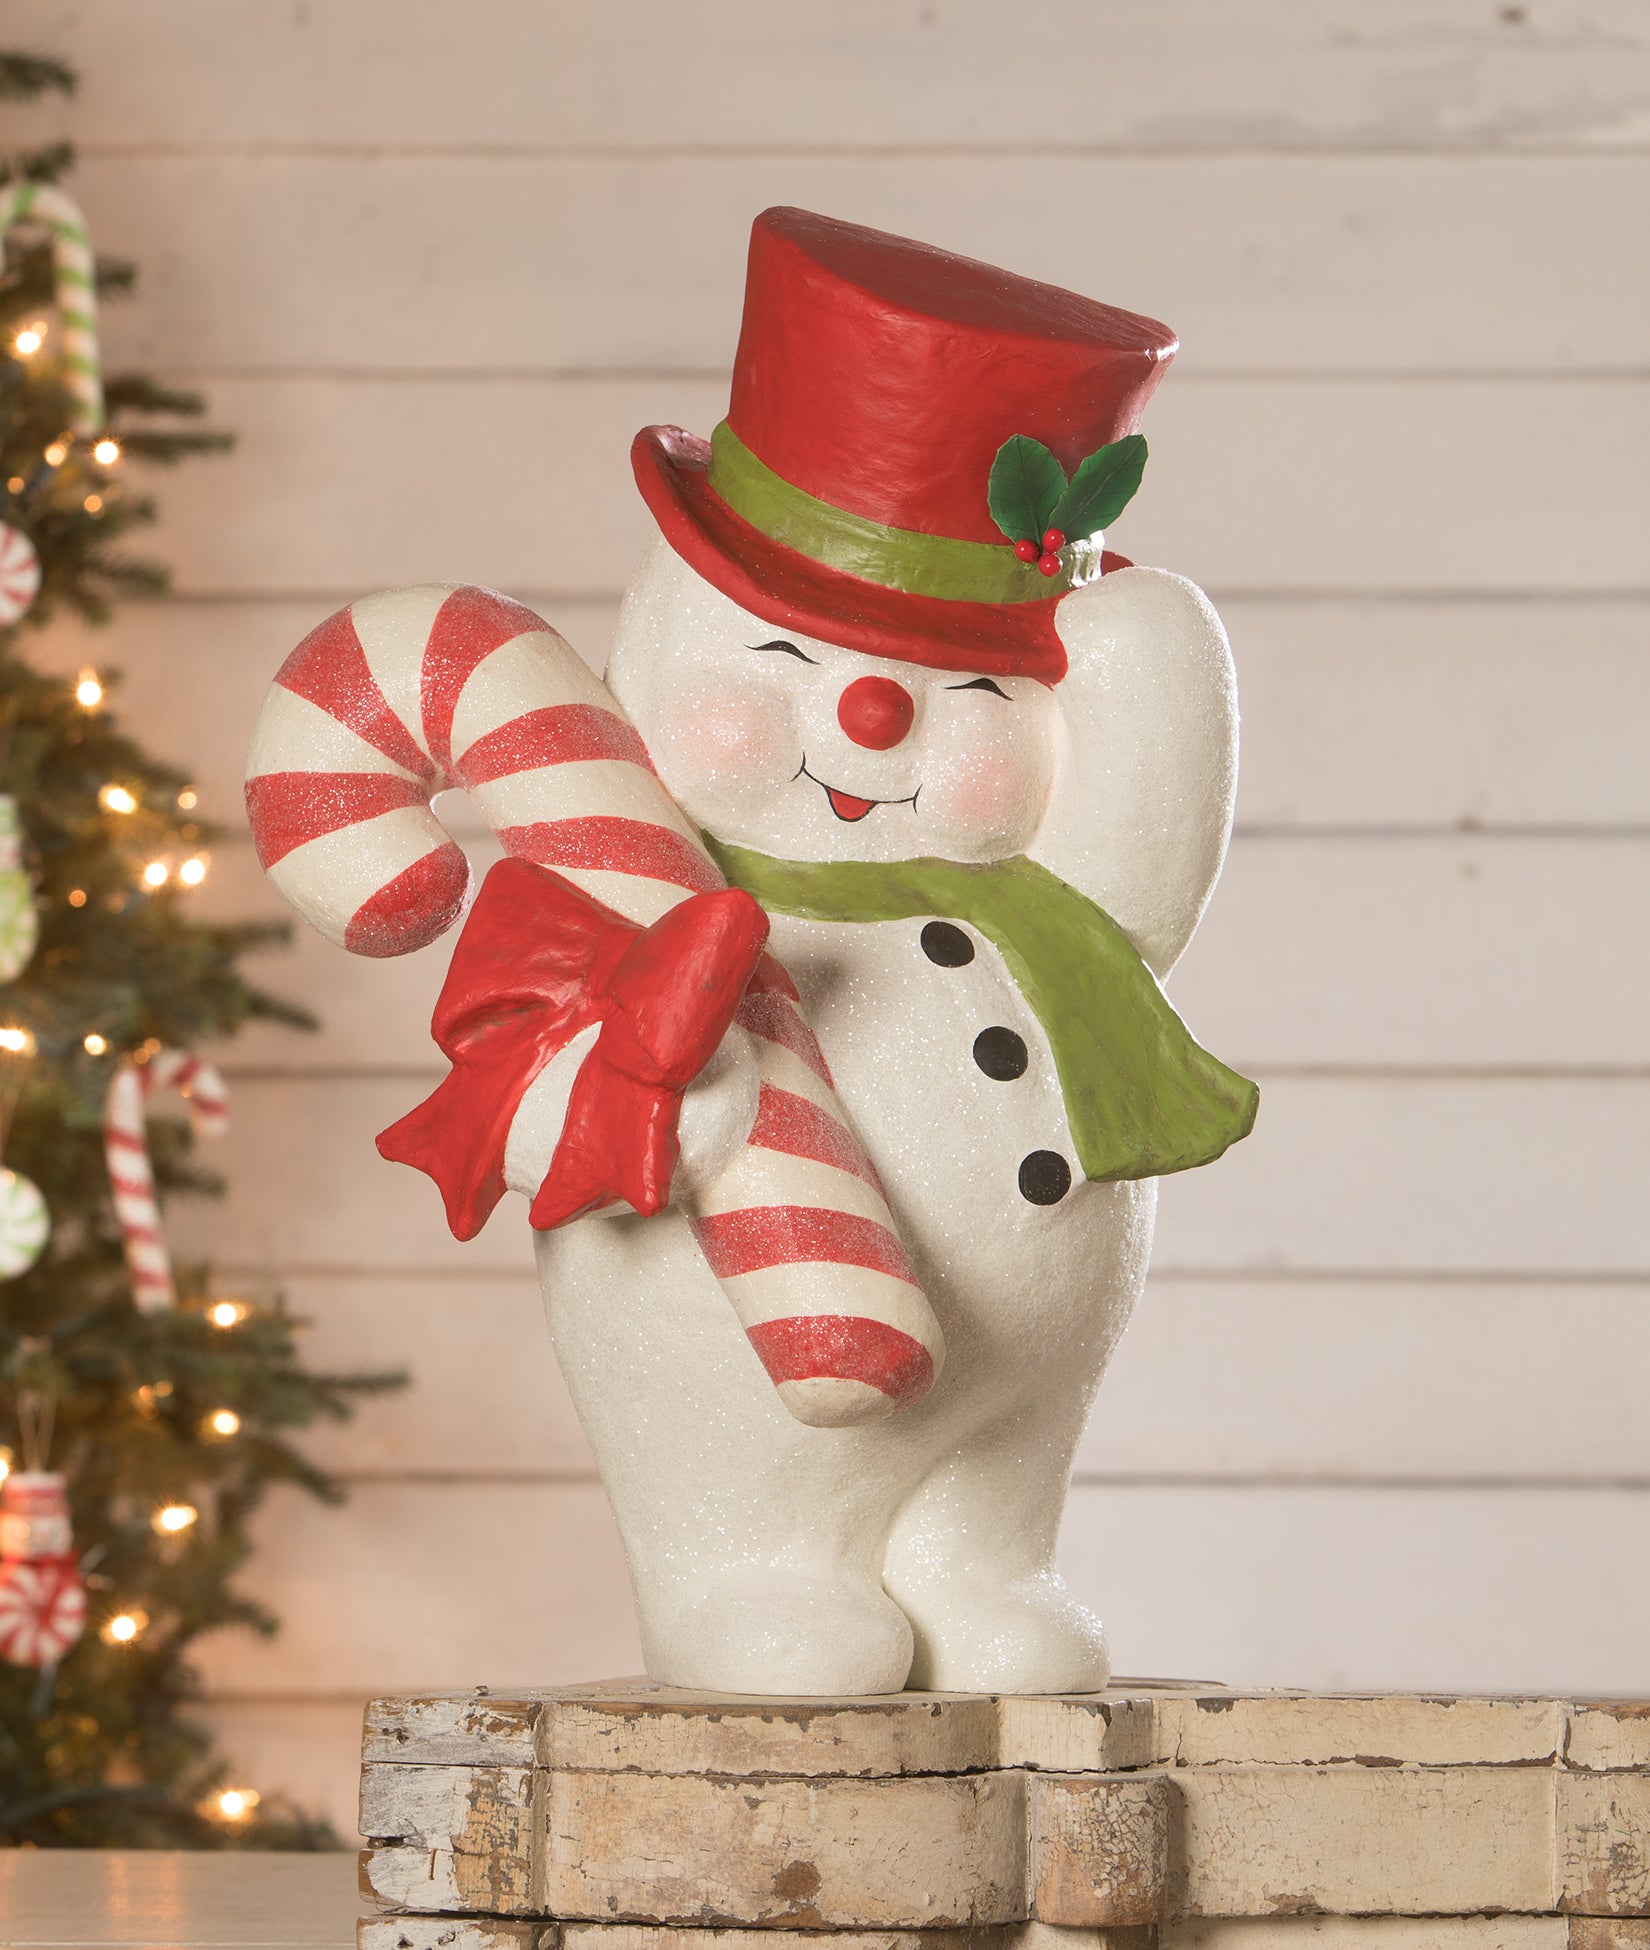 Sammy the Jolly Snowman, Large Paper Mache Snowman with Red Top Hat